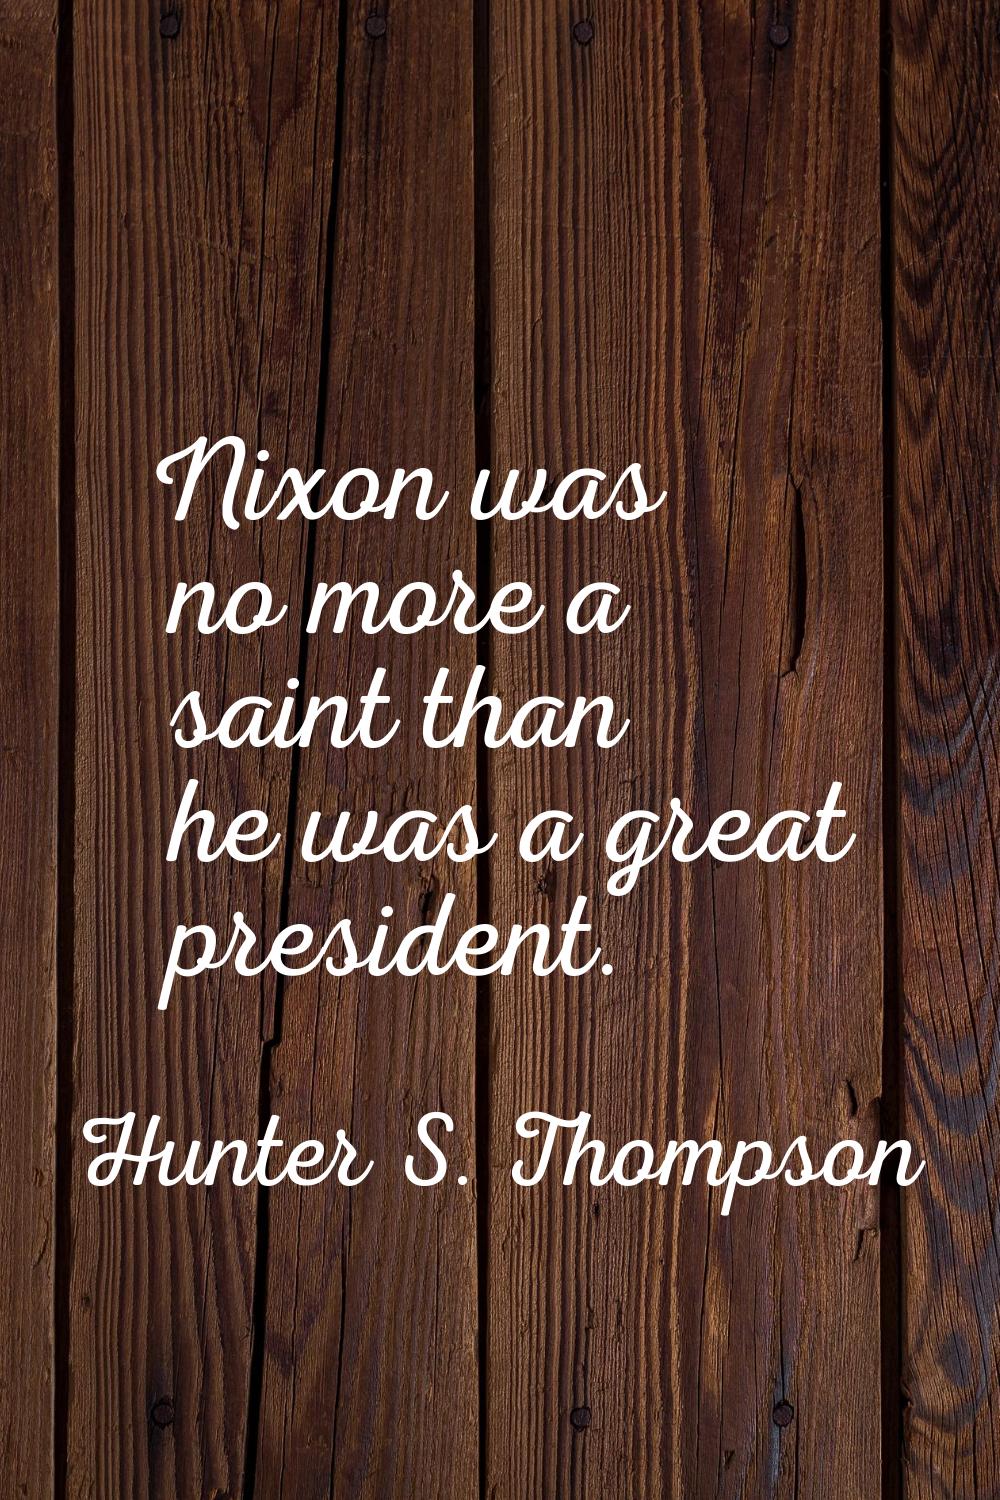 Nixon was no more a saint than he was a great president.